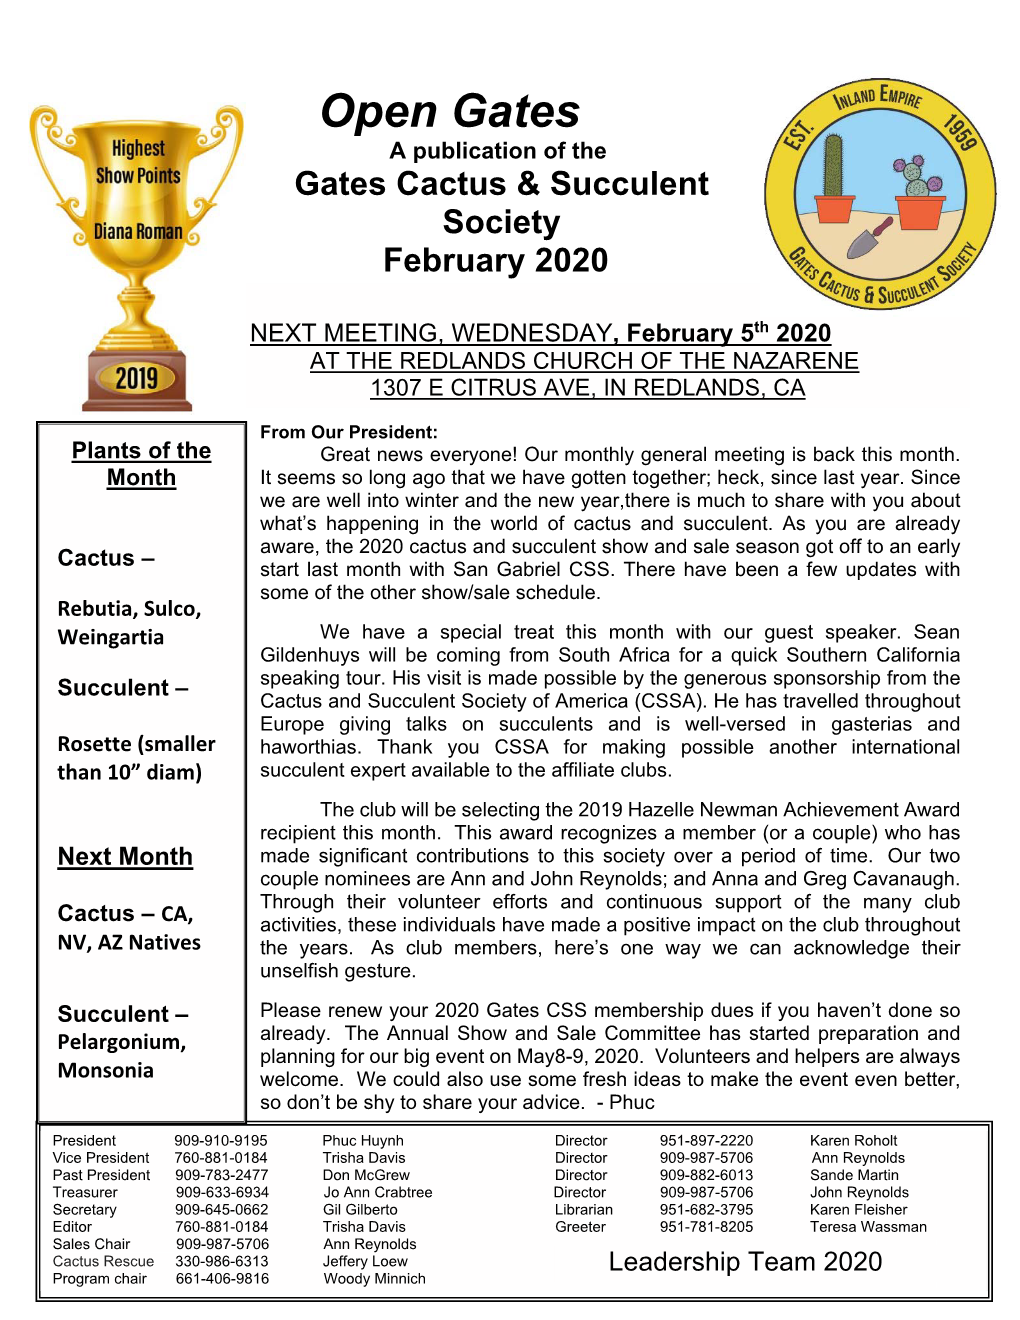 Open Gates a Publication of the Gates Cactus & Succulent Society February 2020